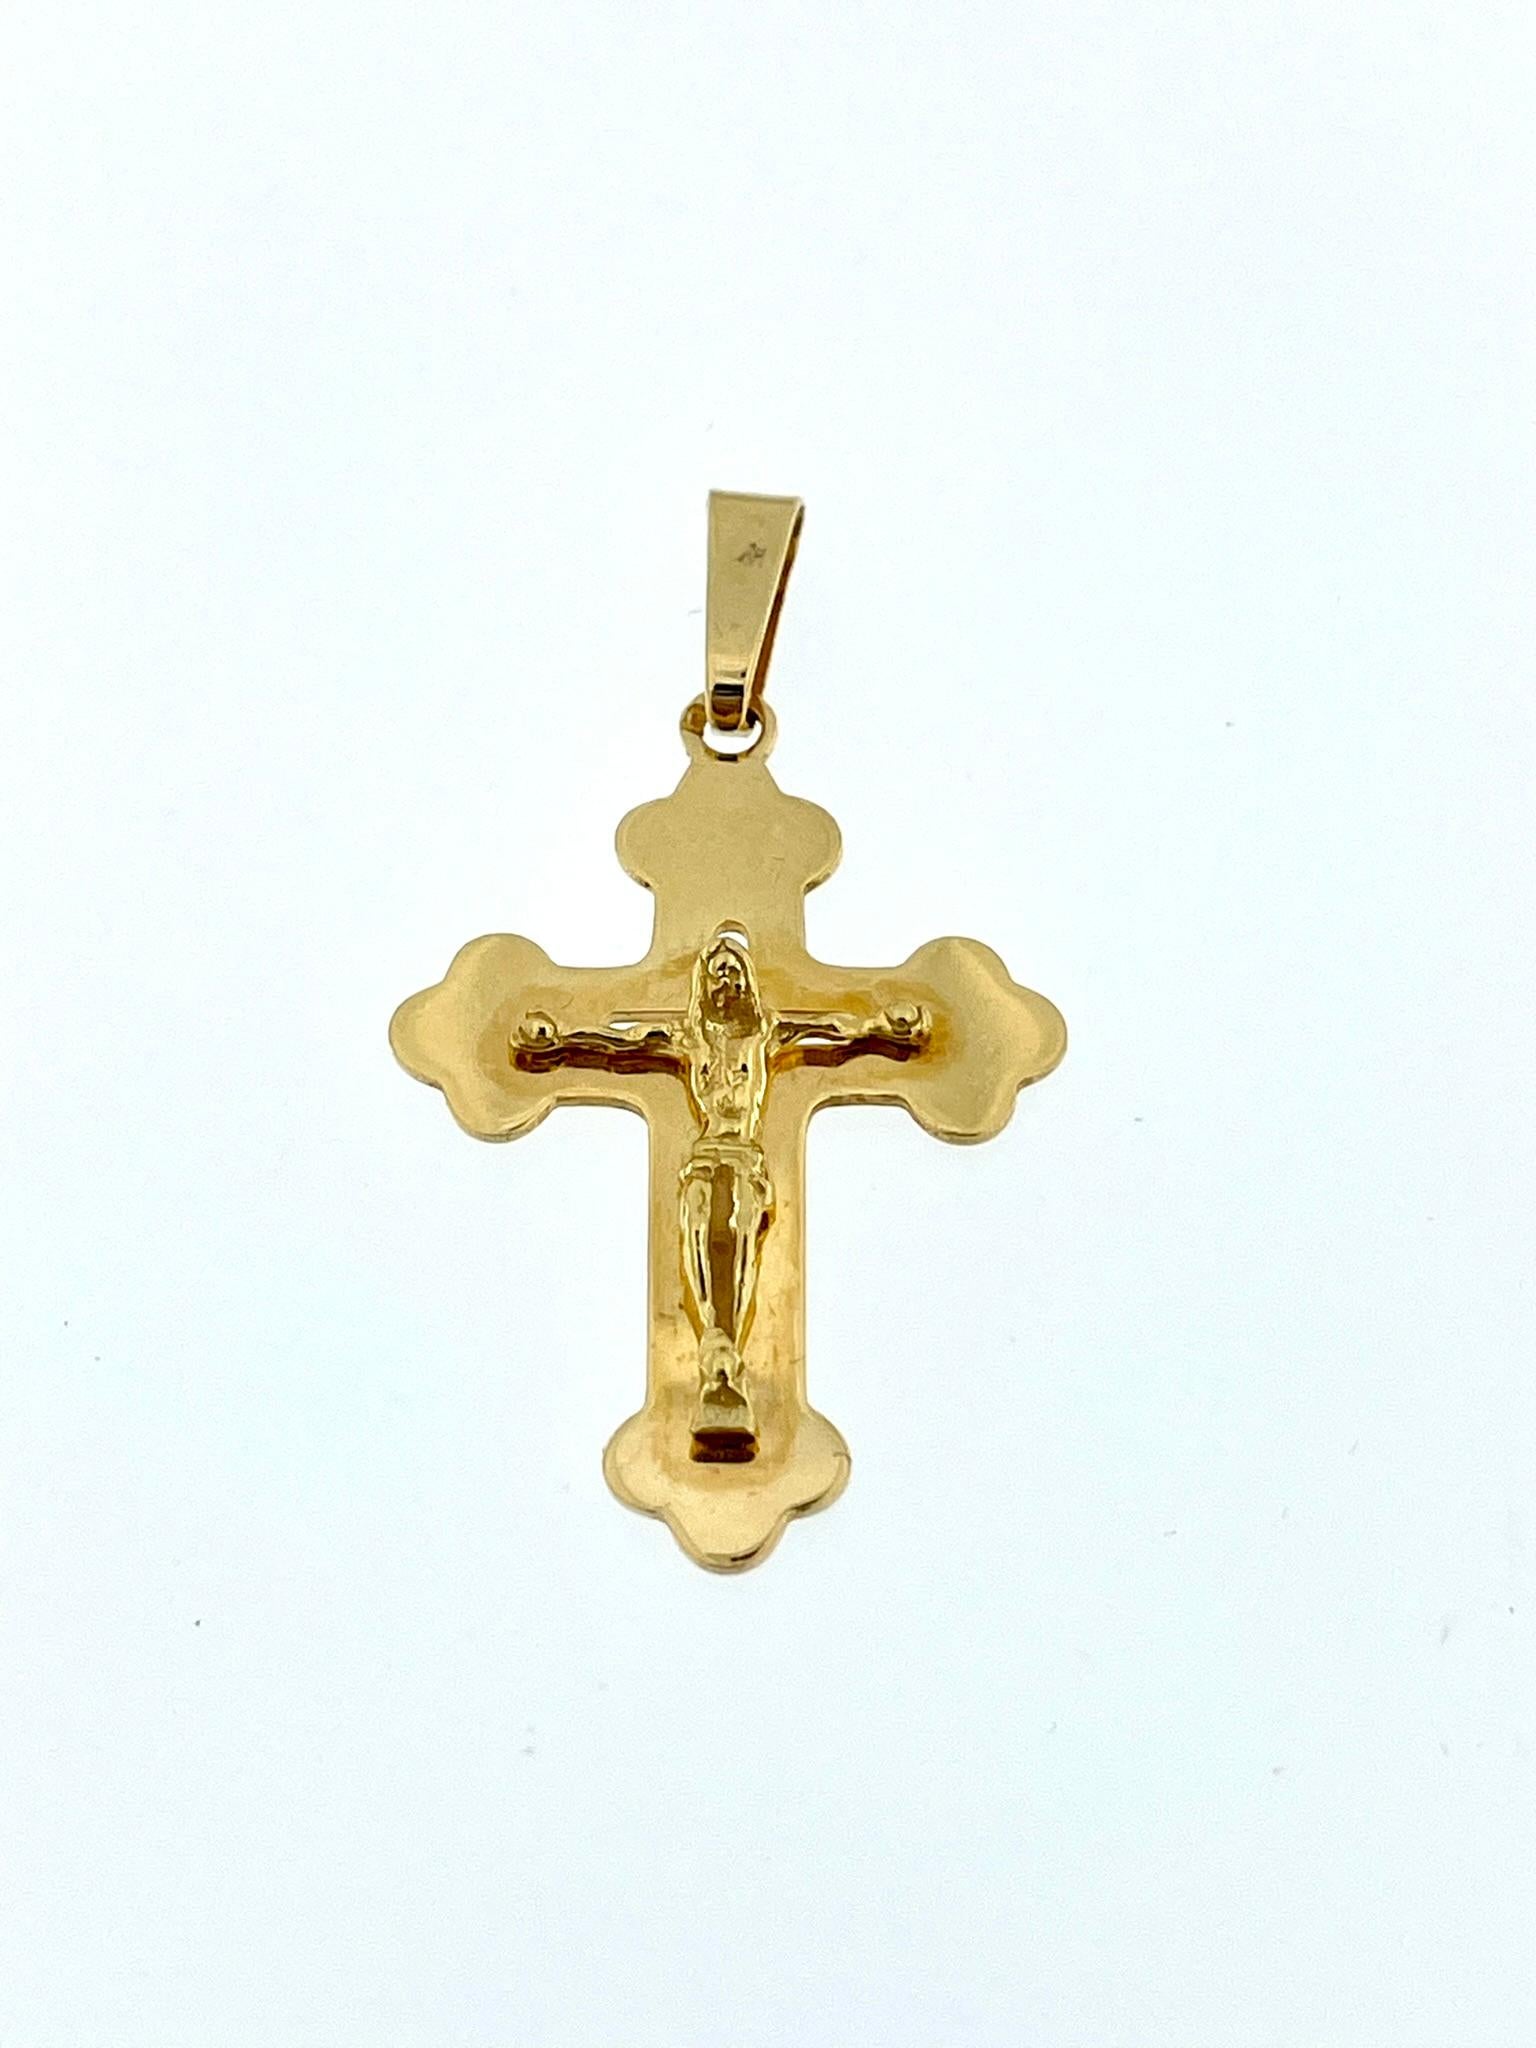 The Greek Orthodox 18kt Yellow Gold Crucifix is a religious cross made from 18-karat yellow gold. It is specifically designed following the style and traditions of the Greek Orthodox Church. The pendant features open work and relief work, which